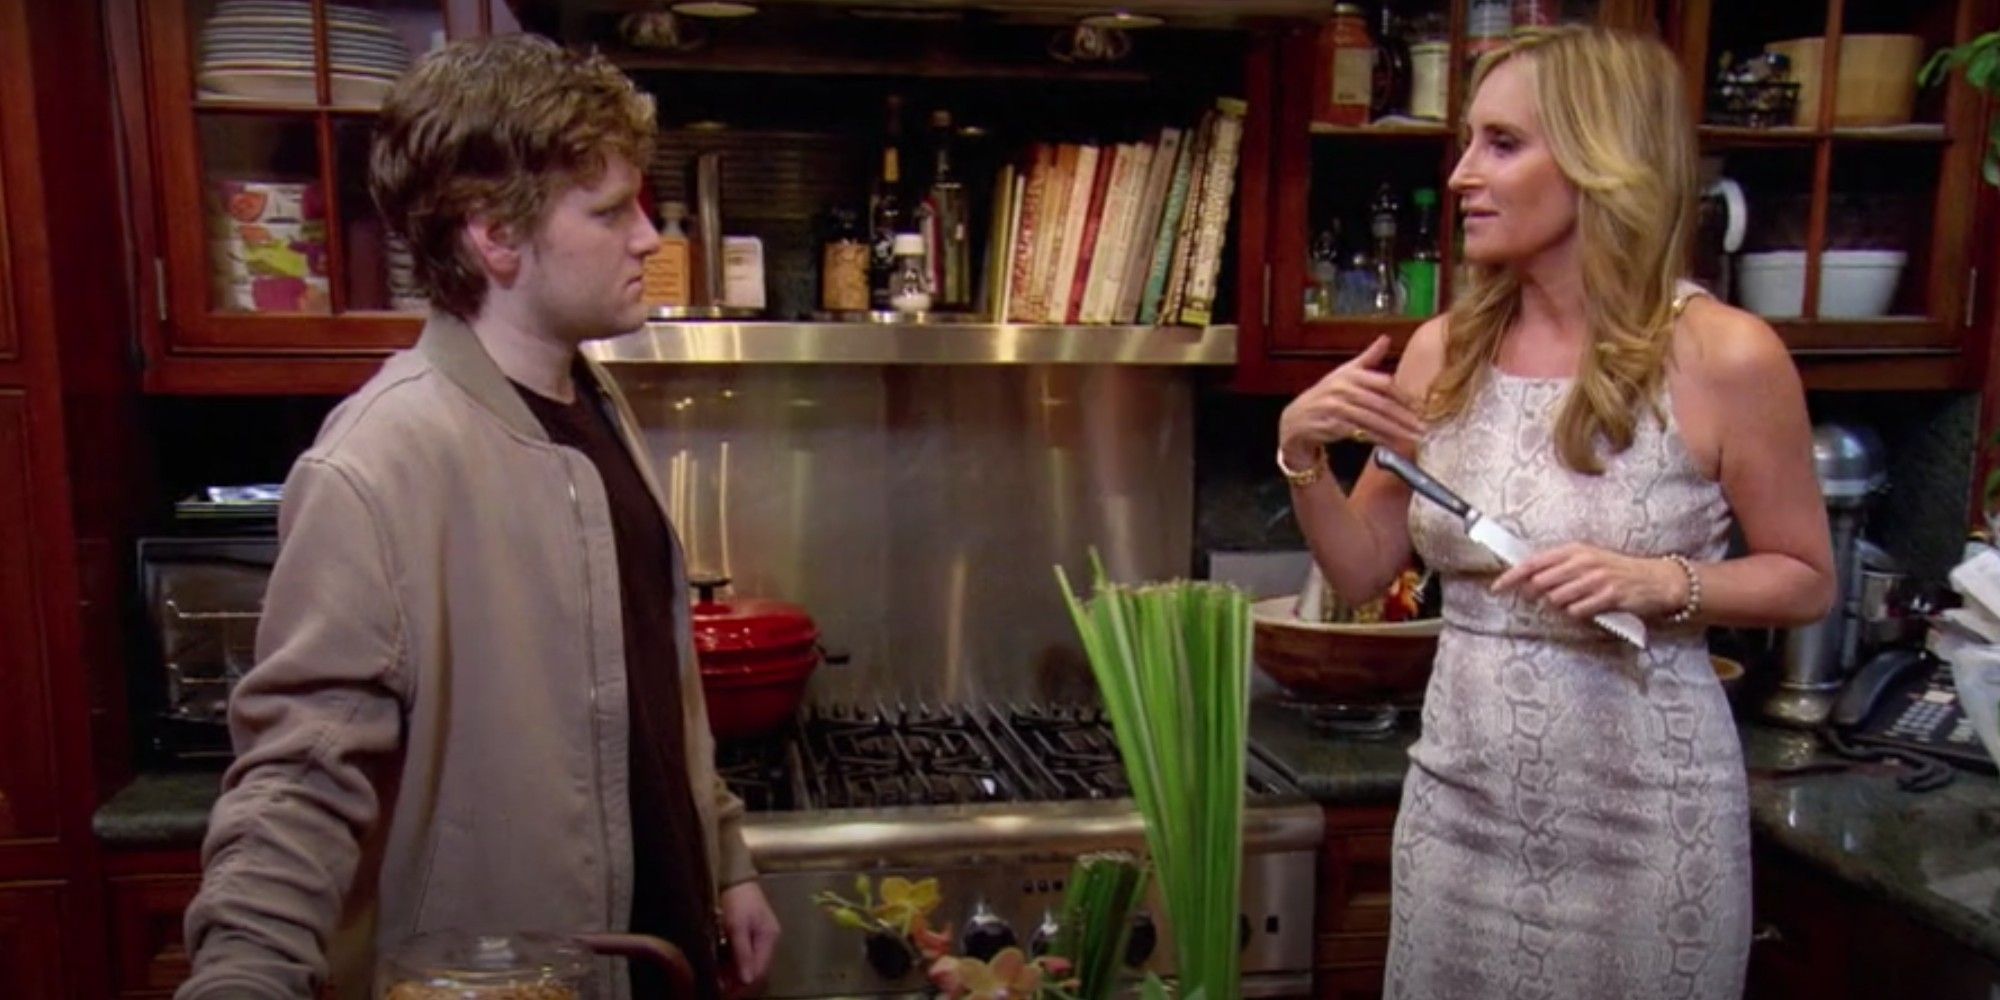 Sonja talking to her intern Connor on RHONY